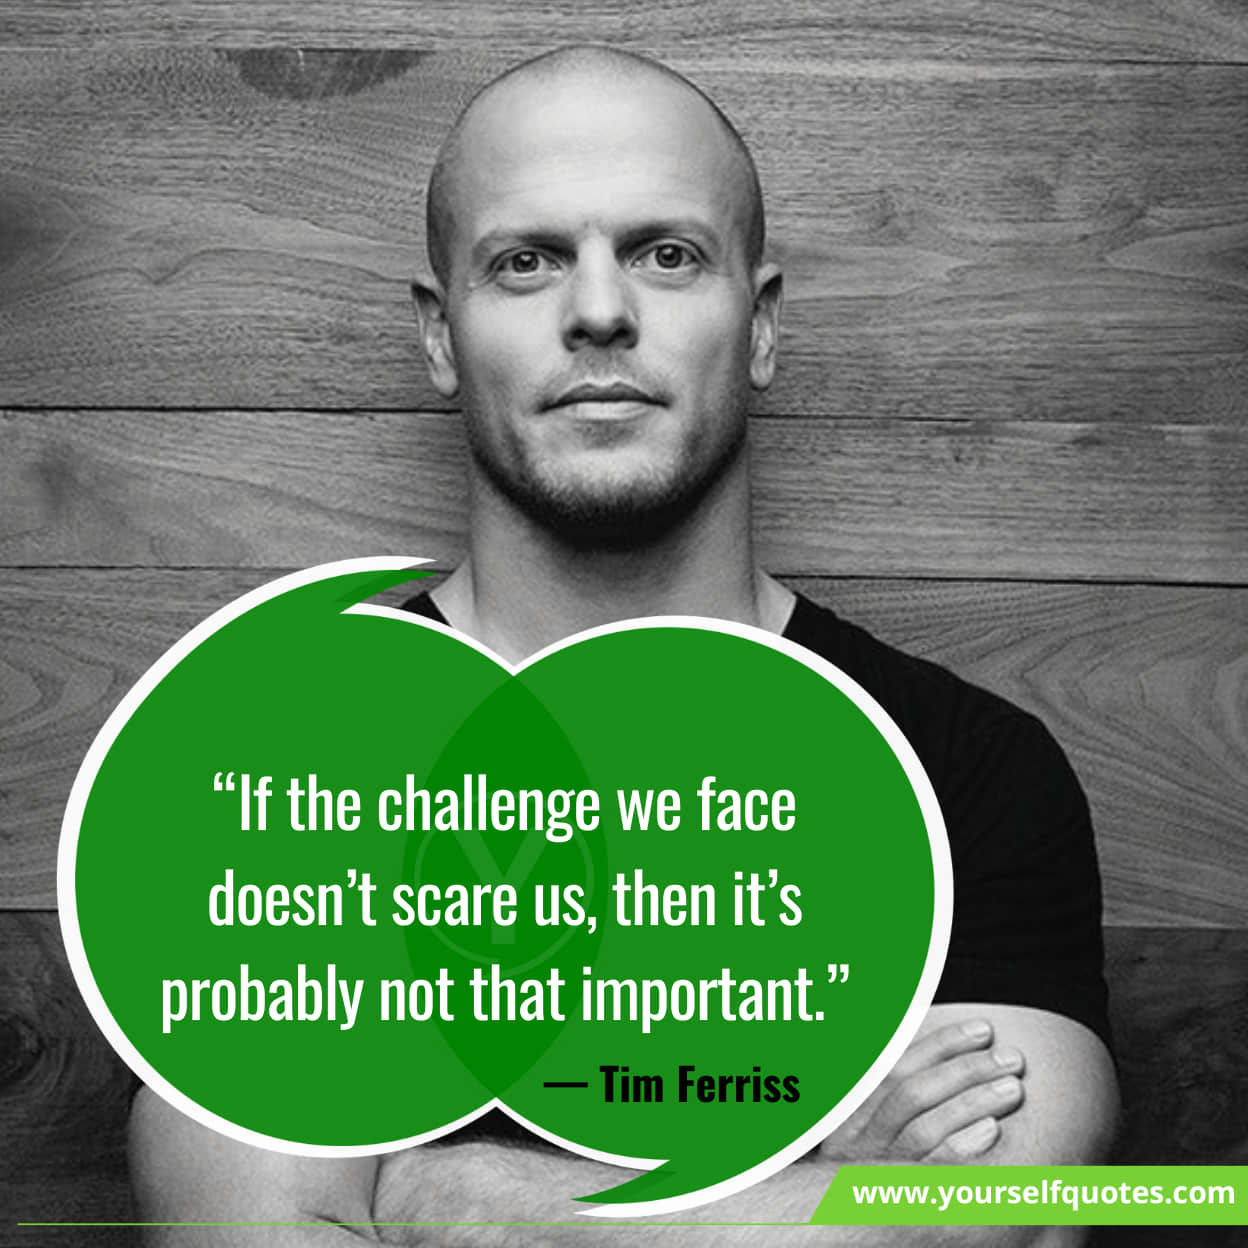 Tim Ferriss Quotes Messages for Motivation